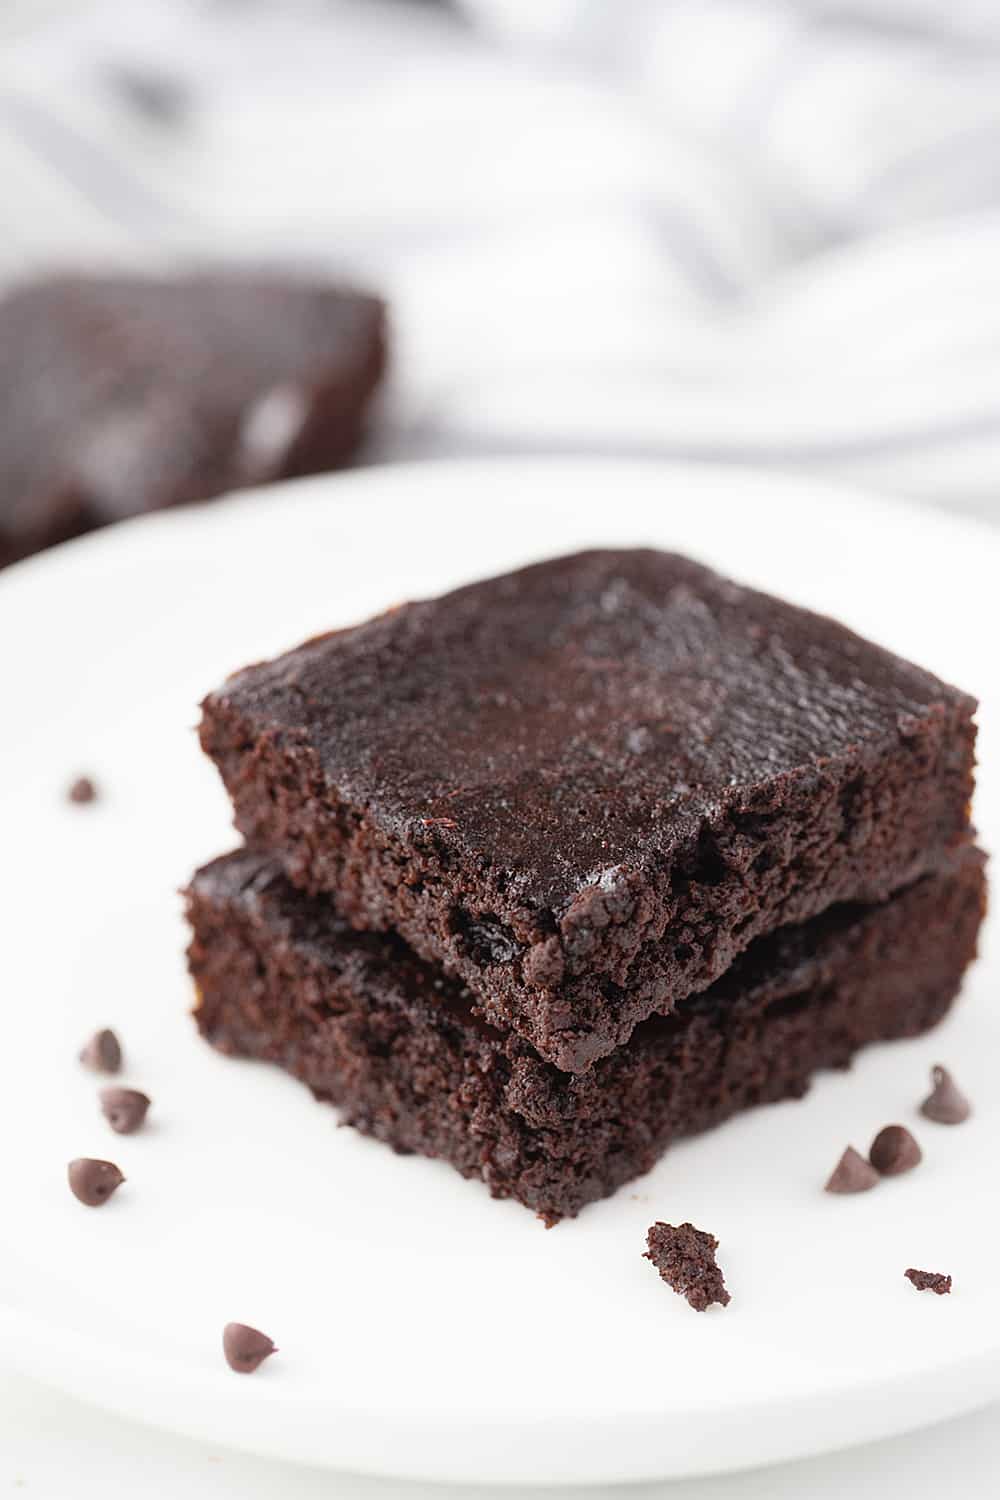 Gluten-Free Brownies: These fudgy, flourless gluten-free brownies are so rich and chocolaty, it's hard to believe they're less than 150 calories a serving! #brownies #glutenfree #flourless #flourlessbrownies #glutenfreebrownies #glutenfreedessert #baking #healthyrecipe #chocolate #halfscratched